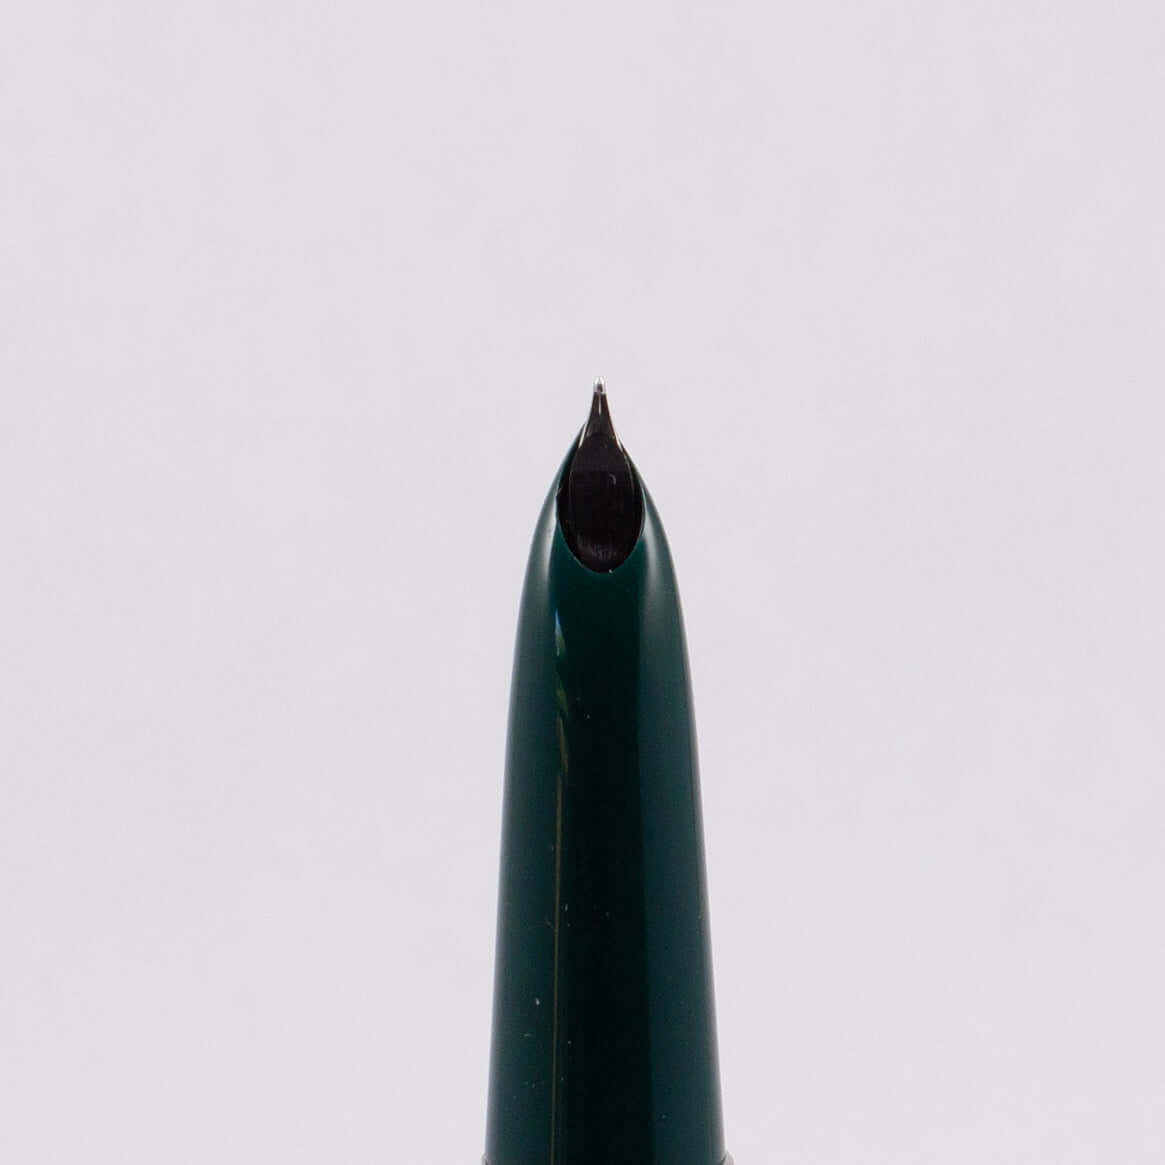 Parker 21, Deluxe Aerometric Filler, Green, Brushed Cap and Ridged Clip Type: Parker Fountain Pen Product Name: Parker 21 Deluxe Manufacture Year: 1952 Length: 5 1/4 Filling System: Aerometric Color/Pattern: Green Nib Type/Condition and remarks: Fine Stee